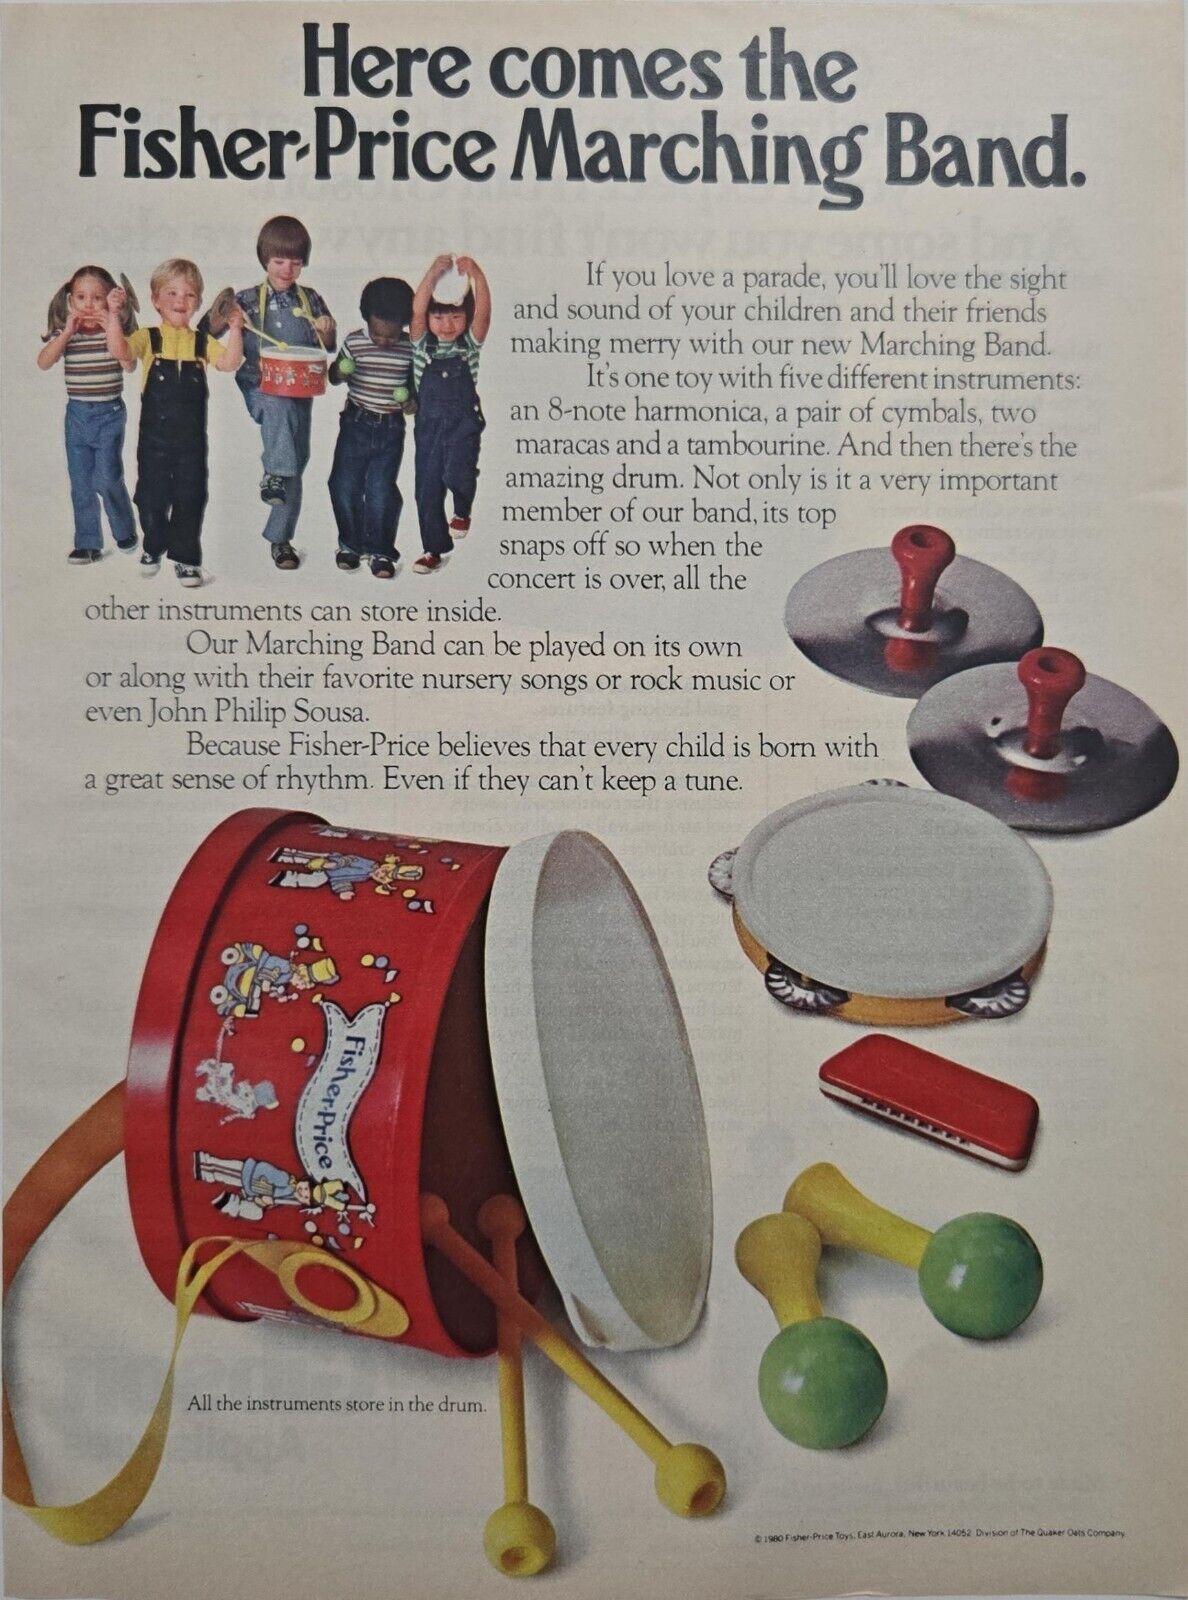 1980 Vintage Fisher Price Marching Band Toys Ad Music Symbols Harmonica Drums 